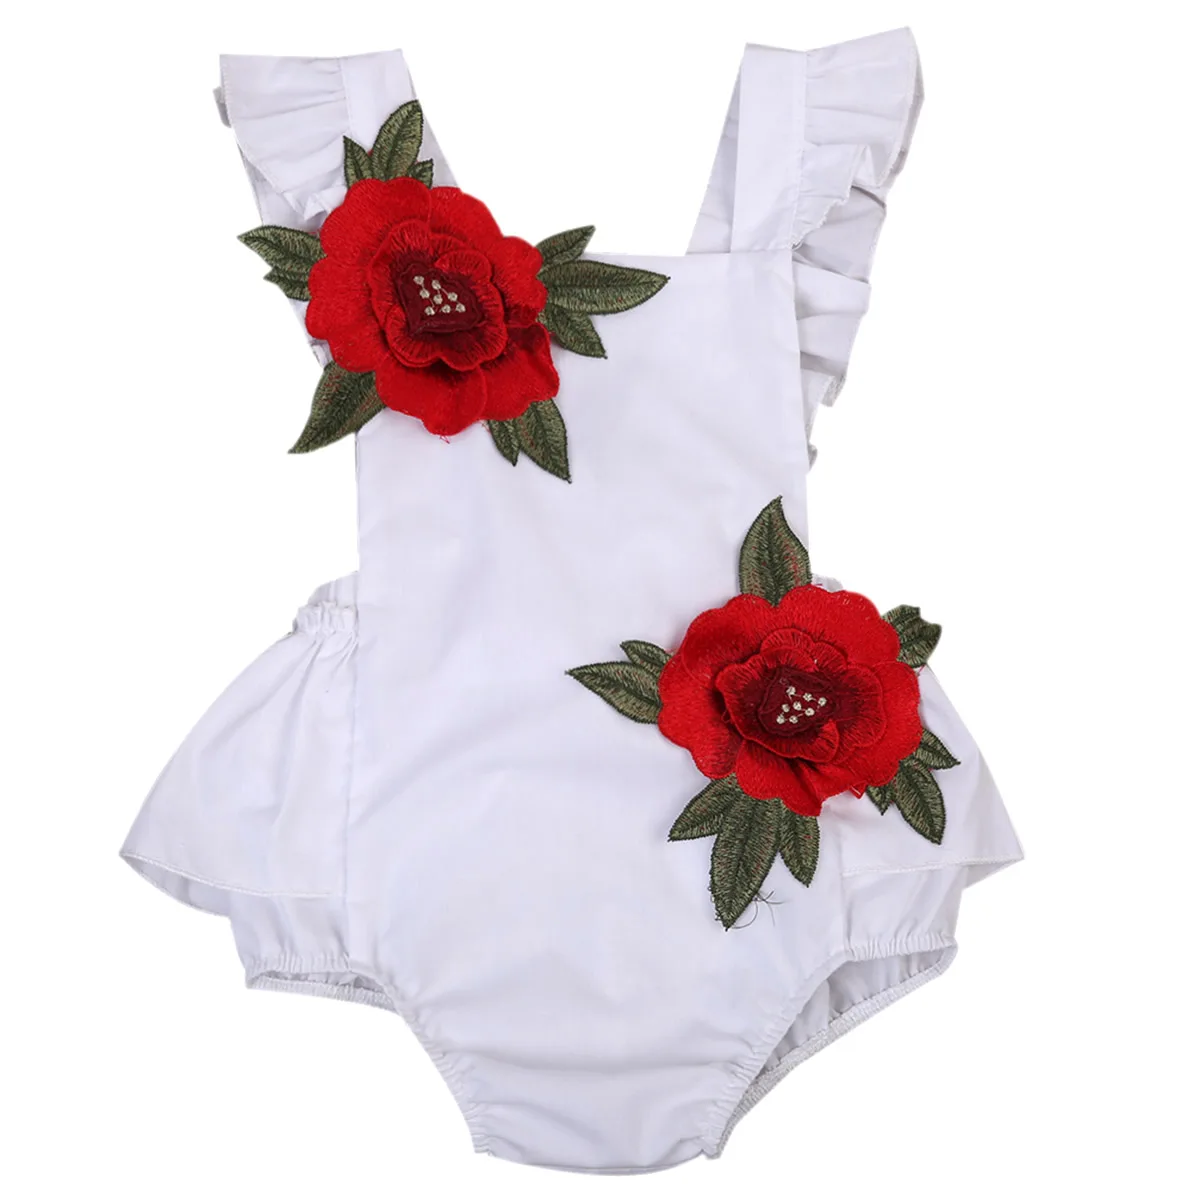 Newest Lovely Infant Baby Girls Fashion White Black Color Fly Sleeve Floral Bodysuits 0-24M |